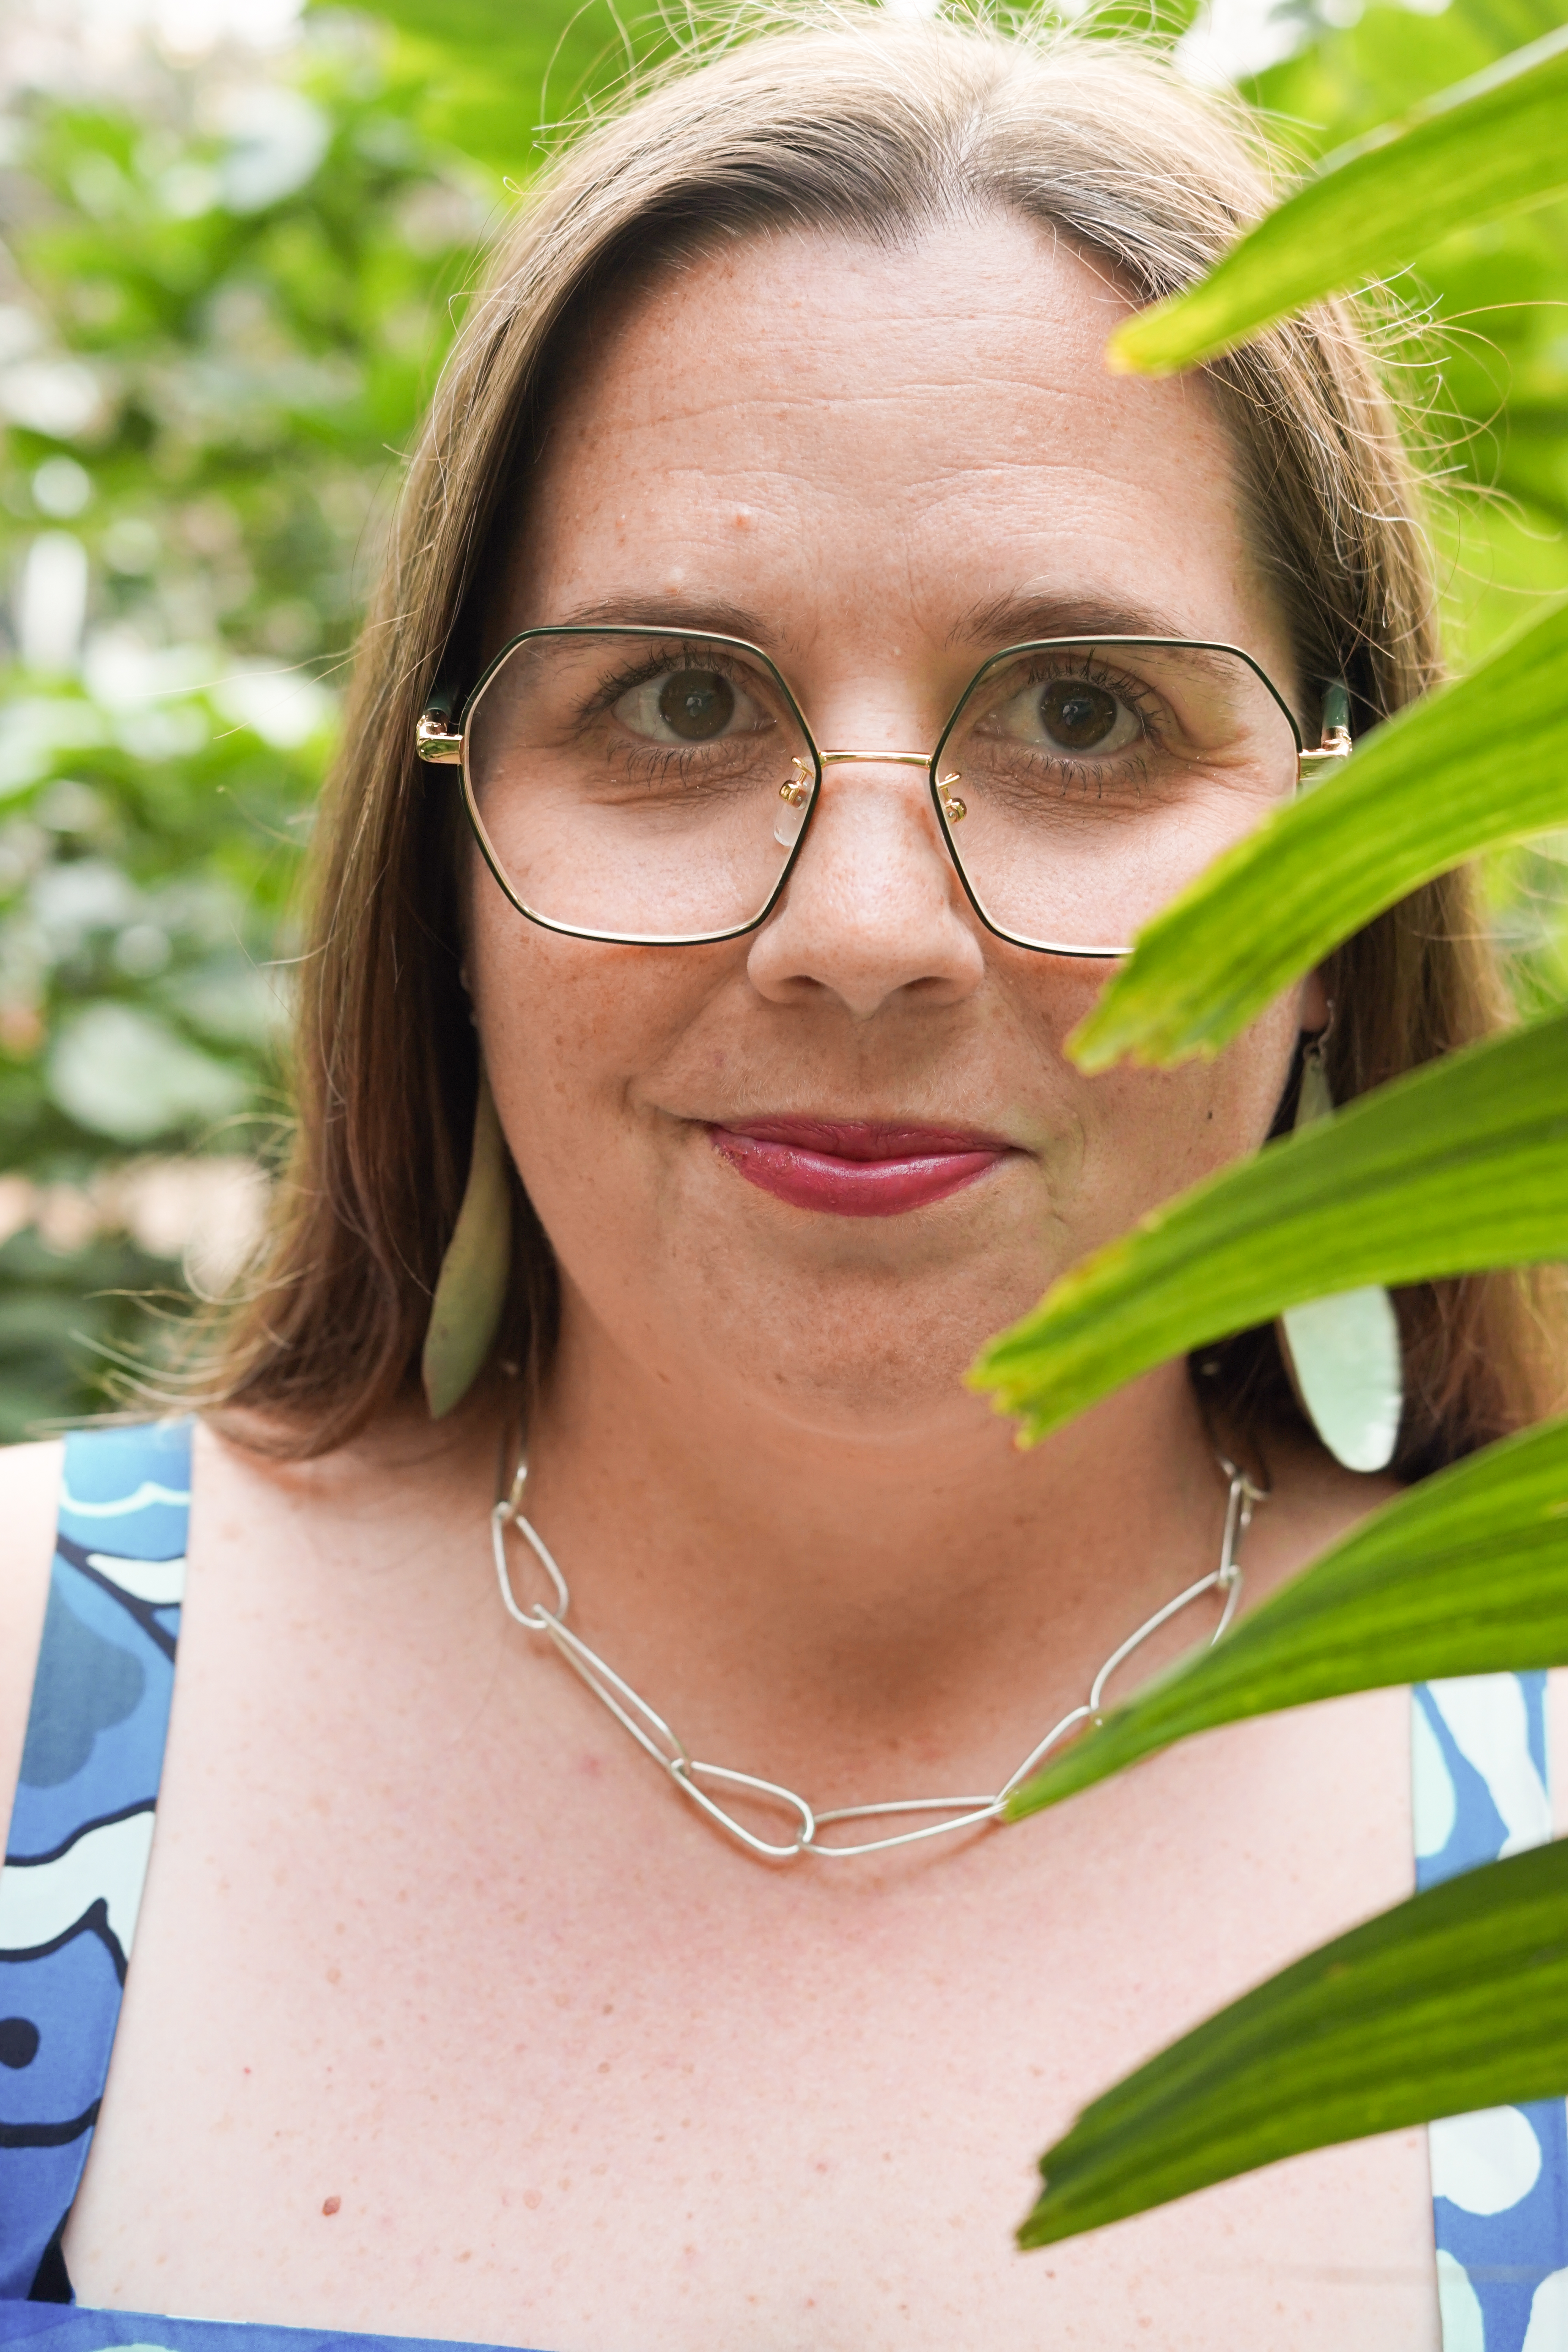 portraits with plants with statement earrings and chunky silver chain necklace